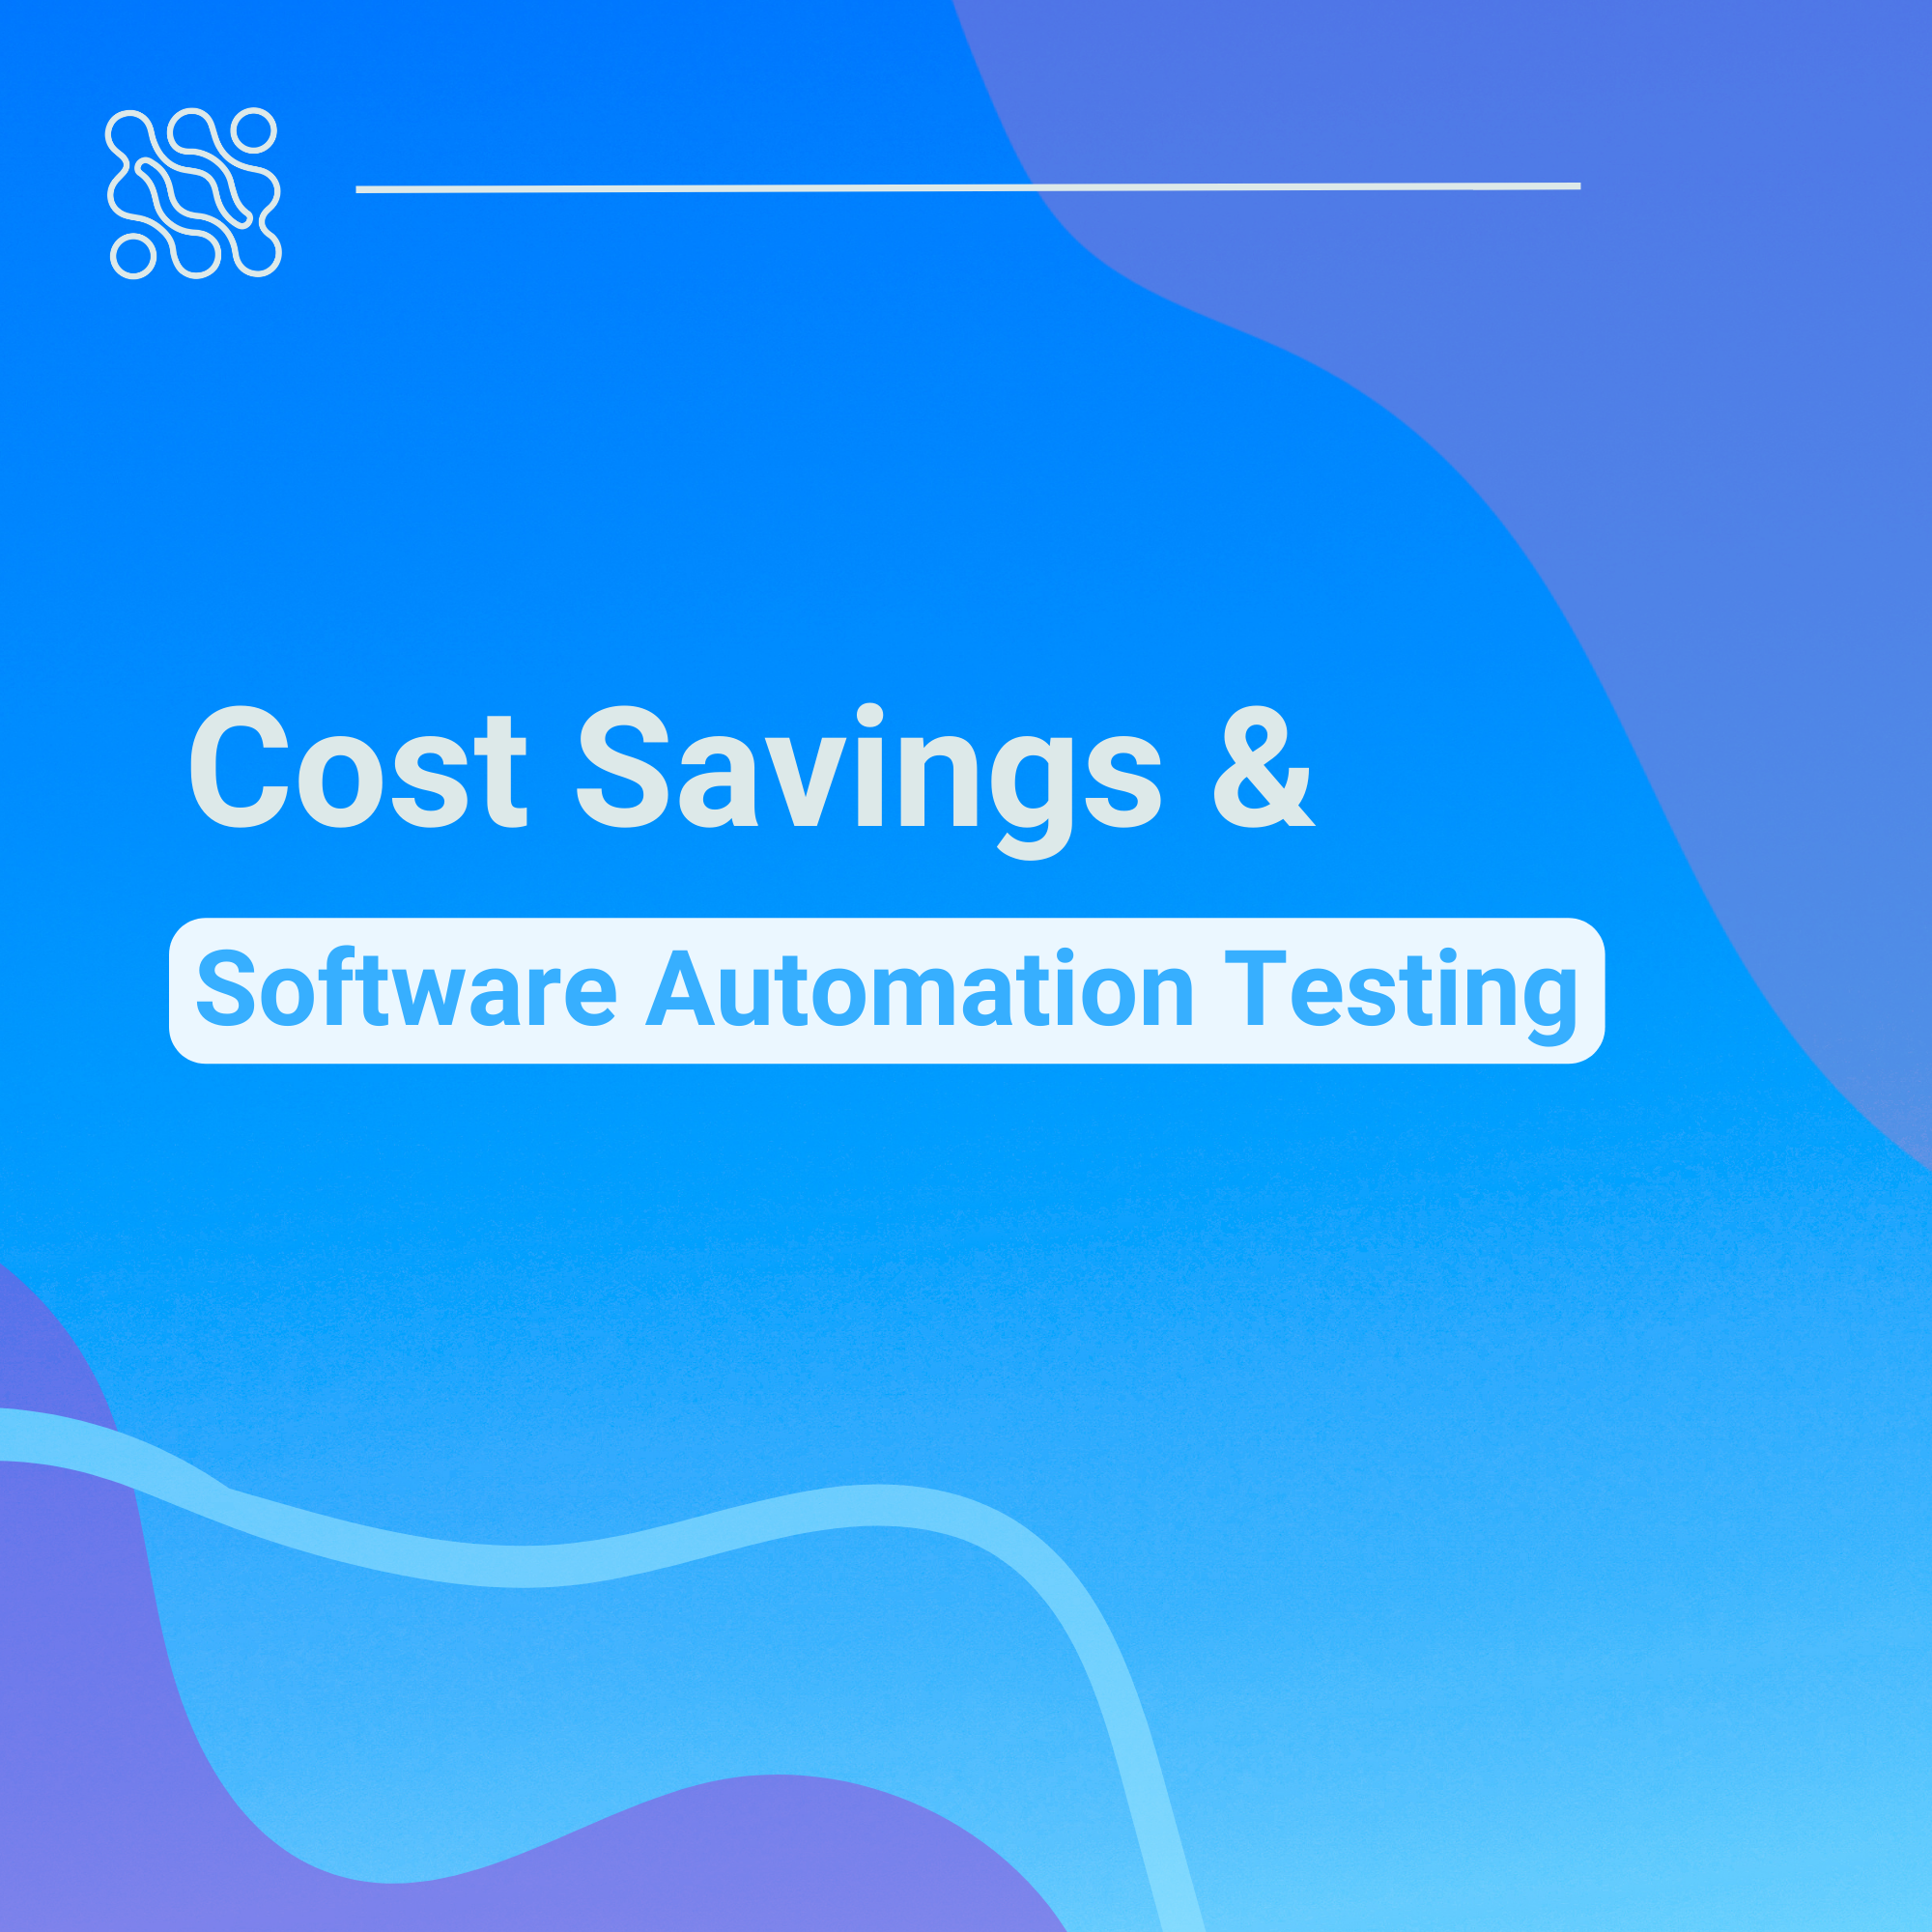 The importance of cost savings with software automation testing